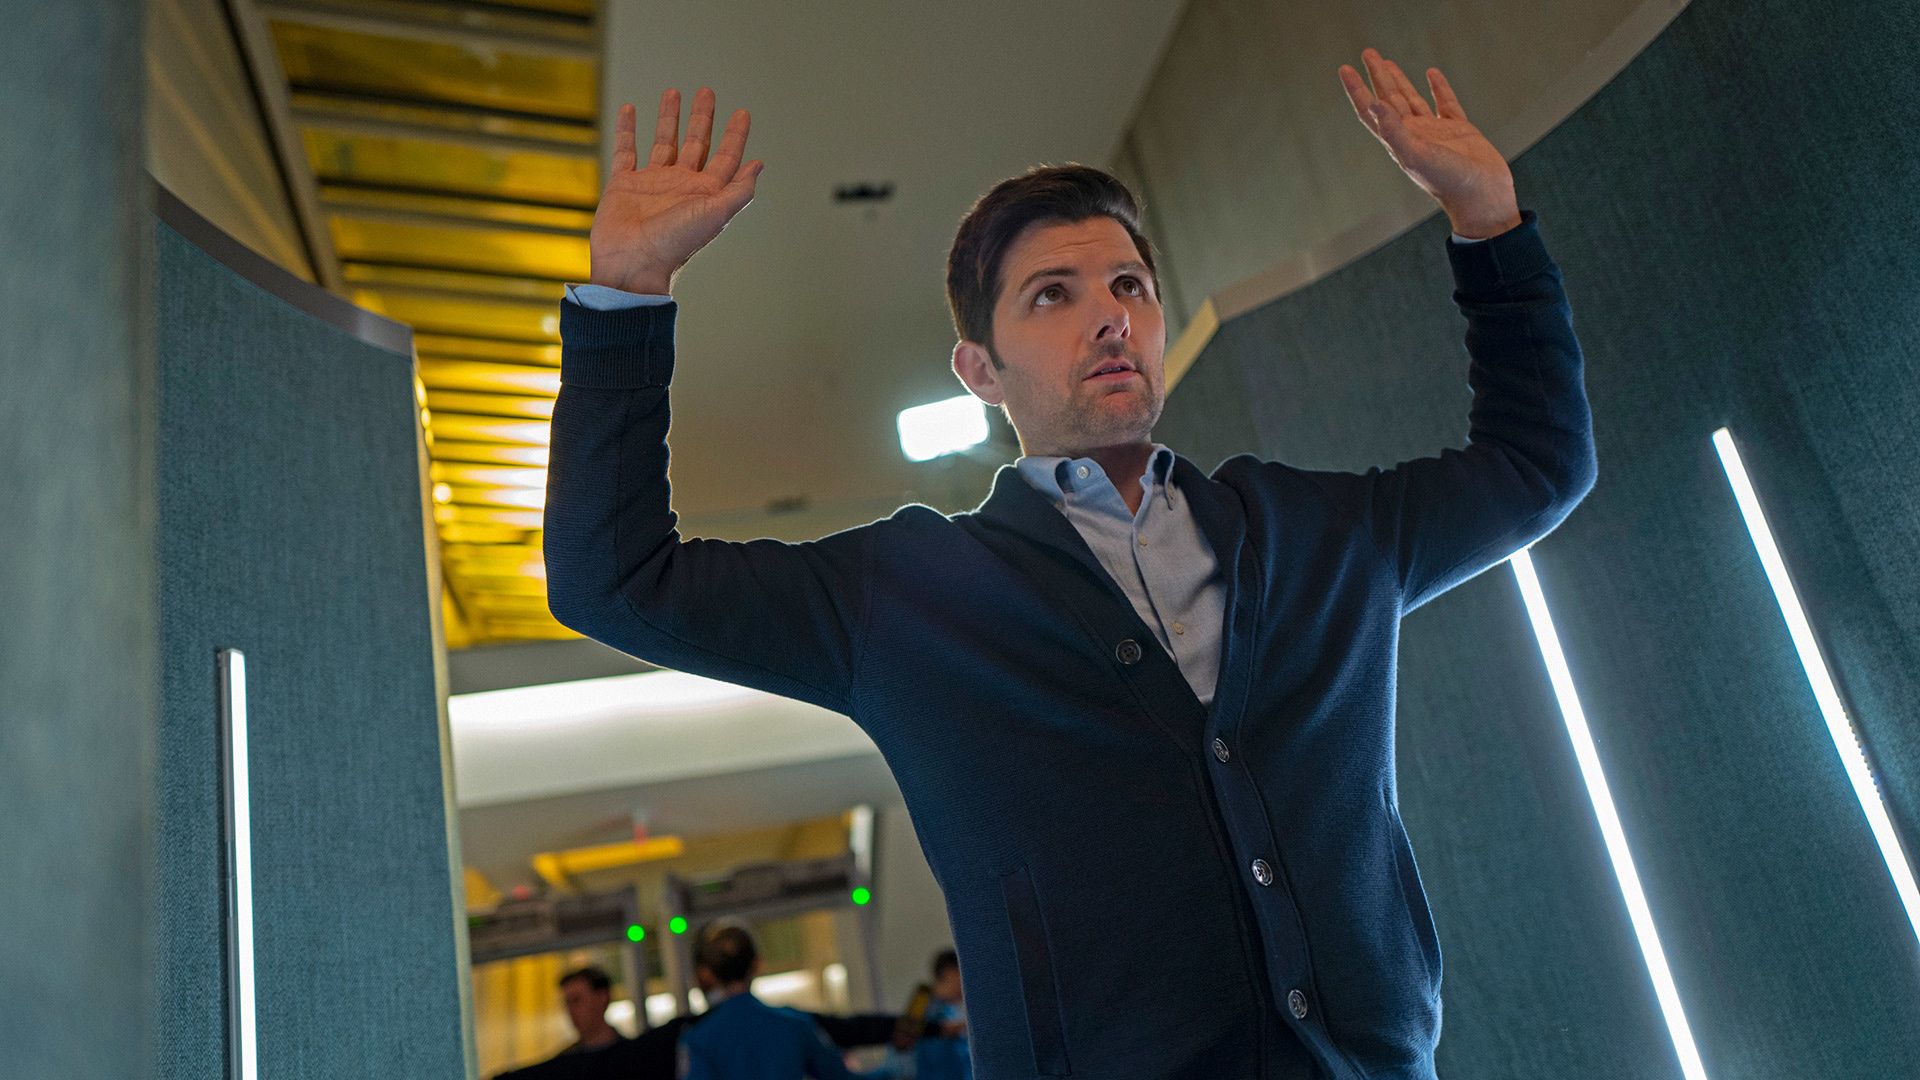 Adam Scott wears a cardigan sweater while putting his hands up prior to being arrested.